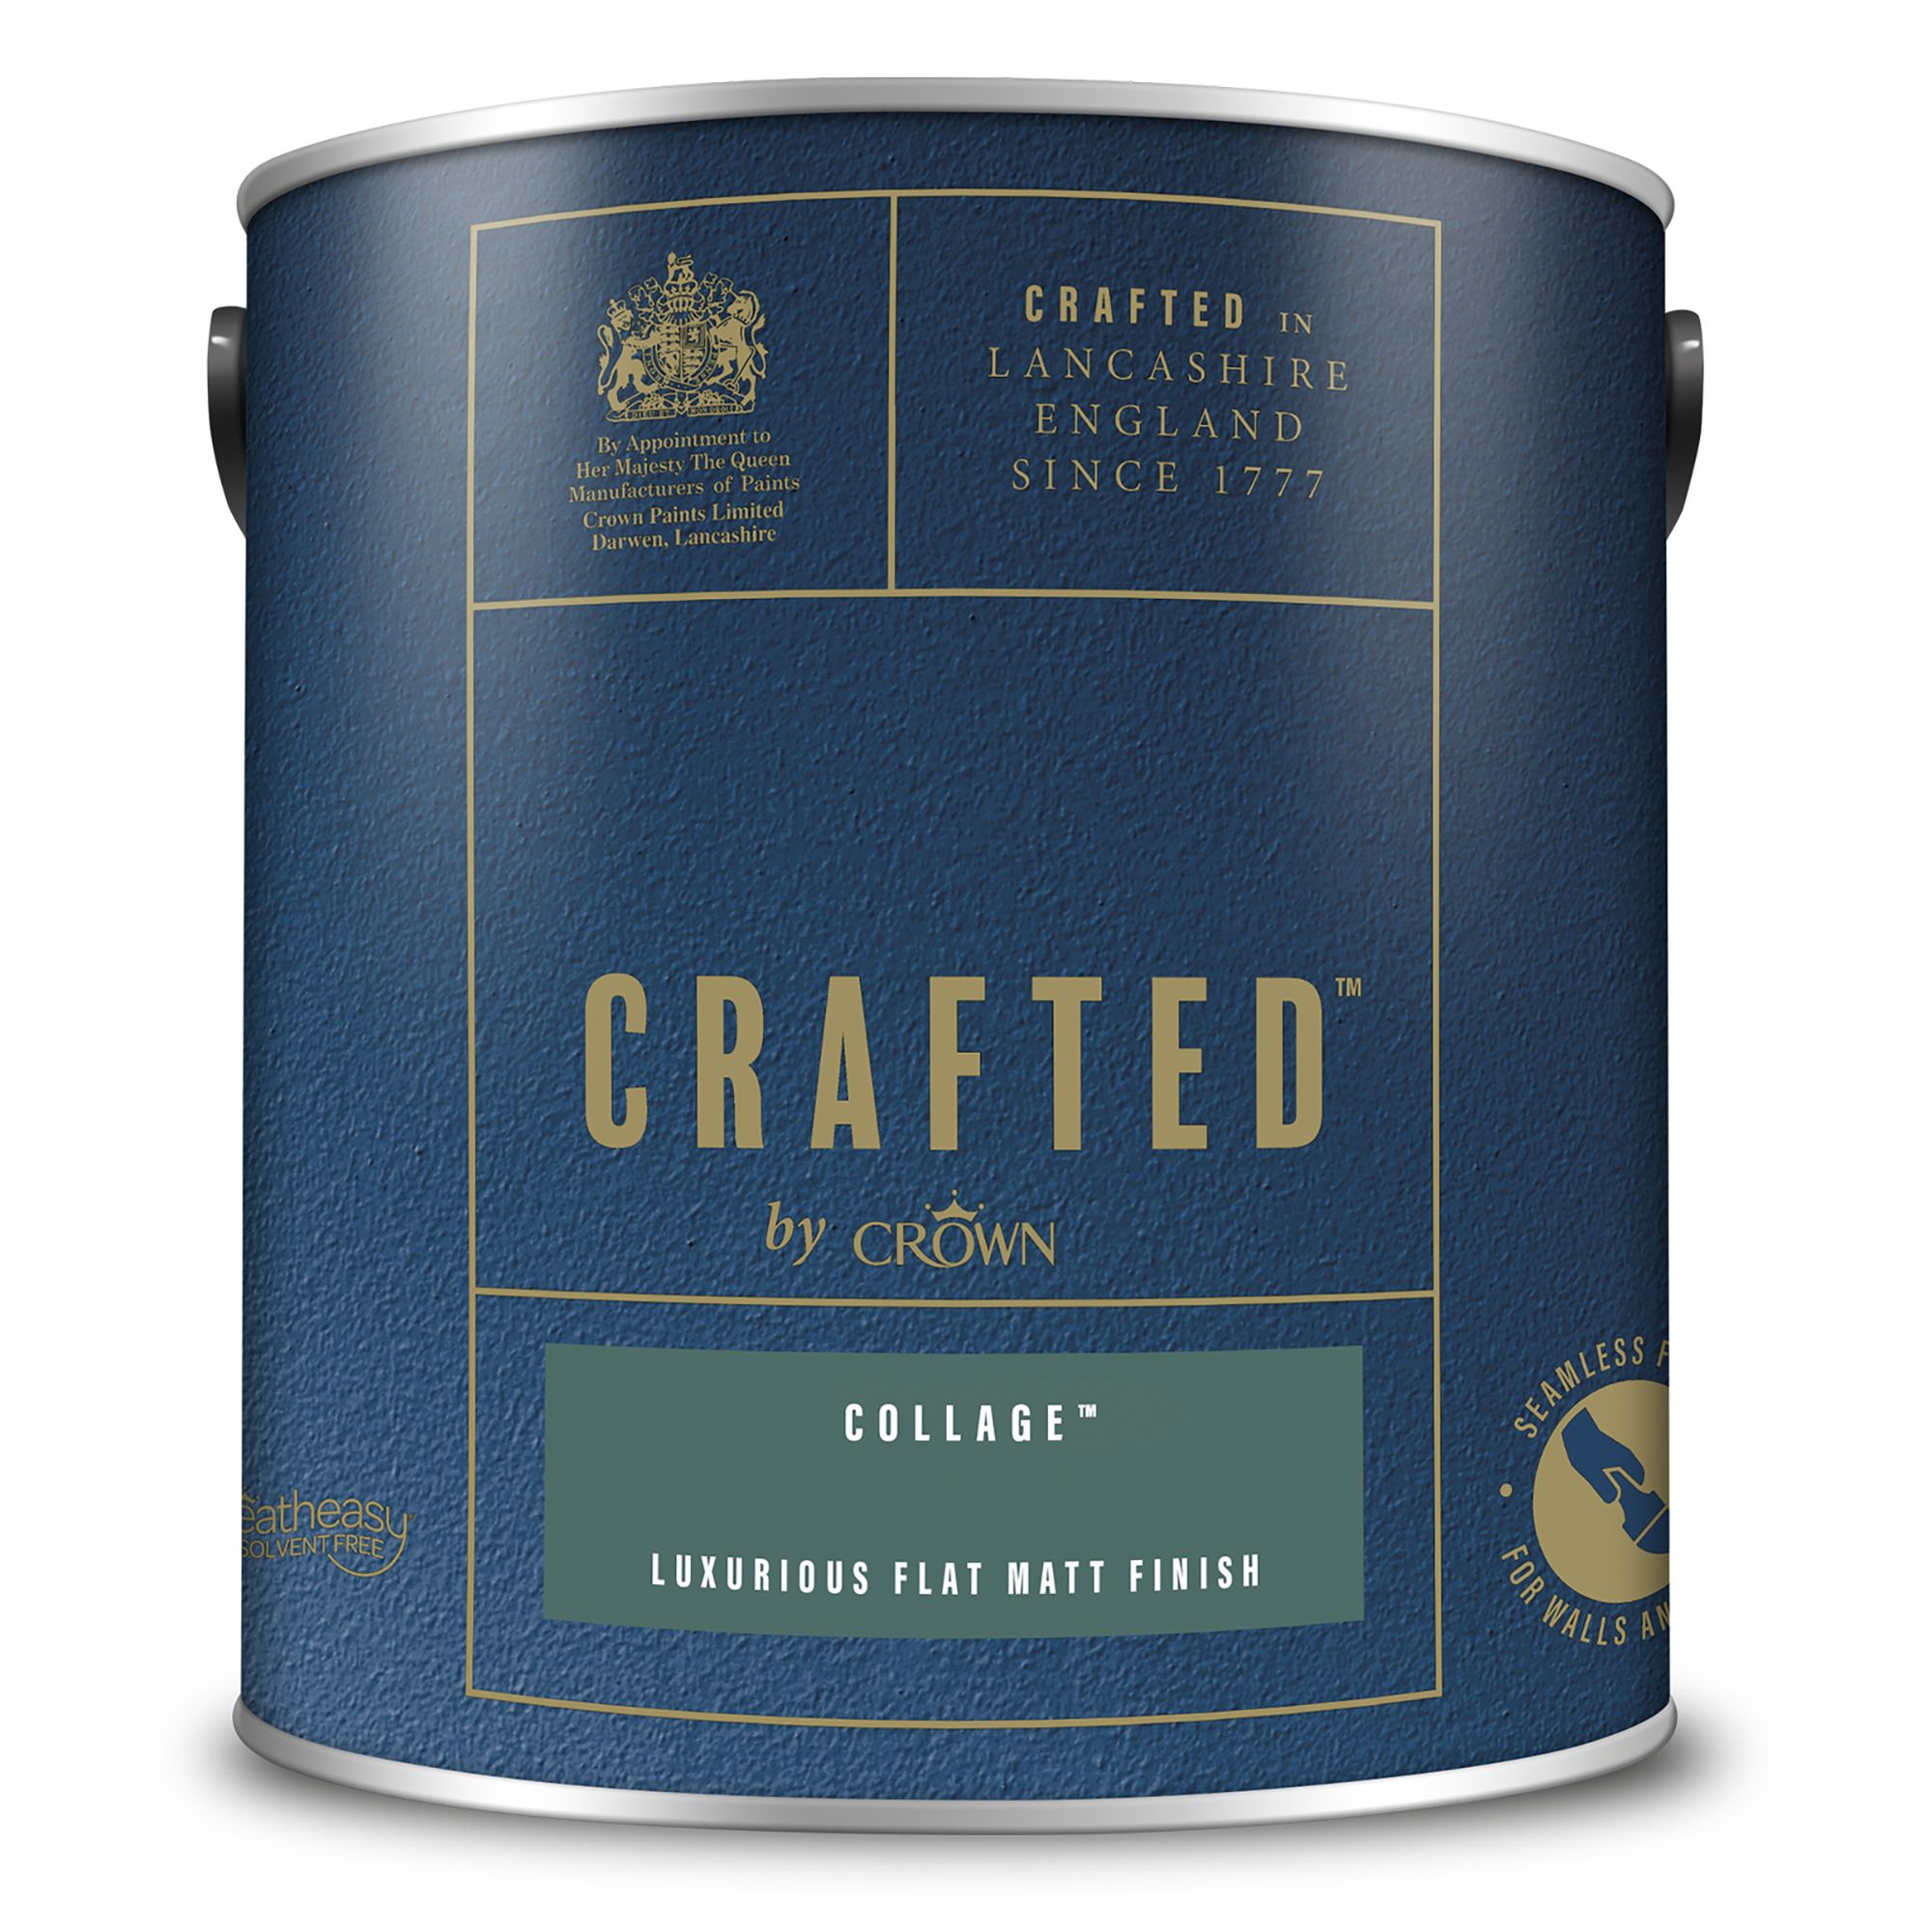 Crown Crafted Collage Matt Emulsion paint, 2.5L